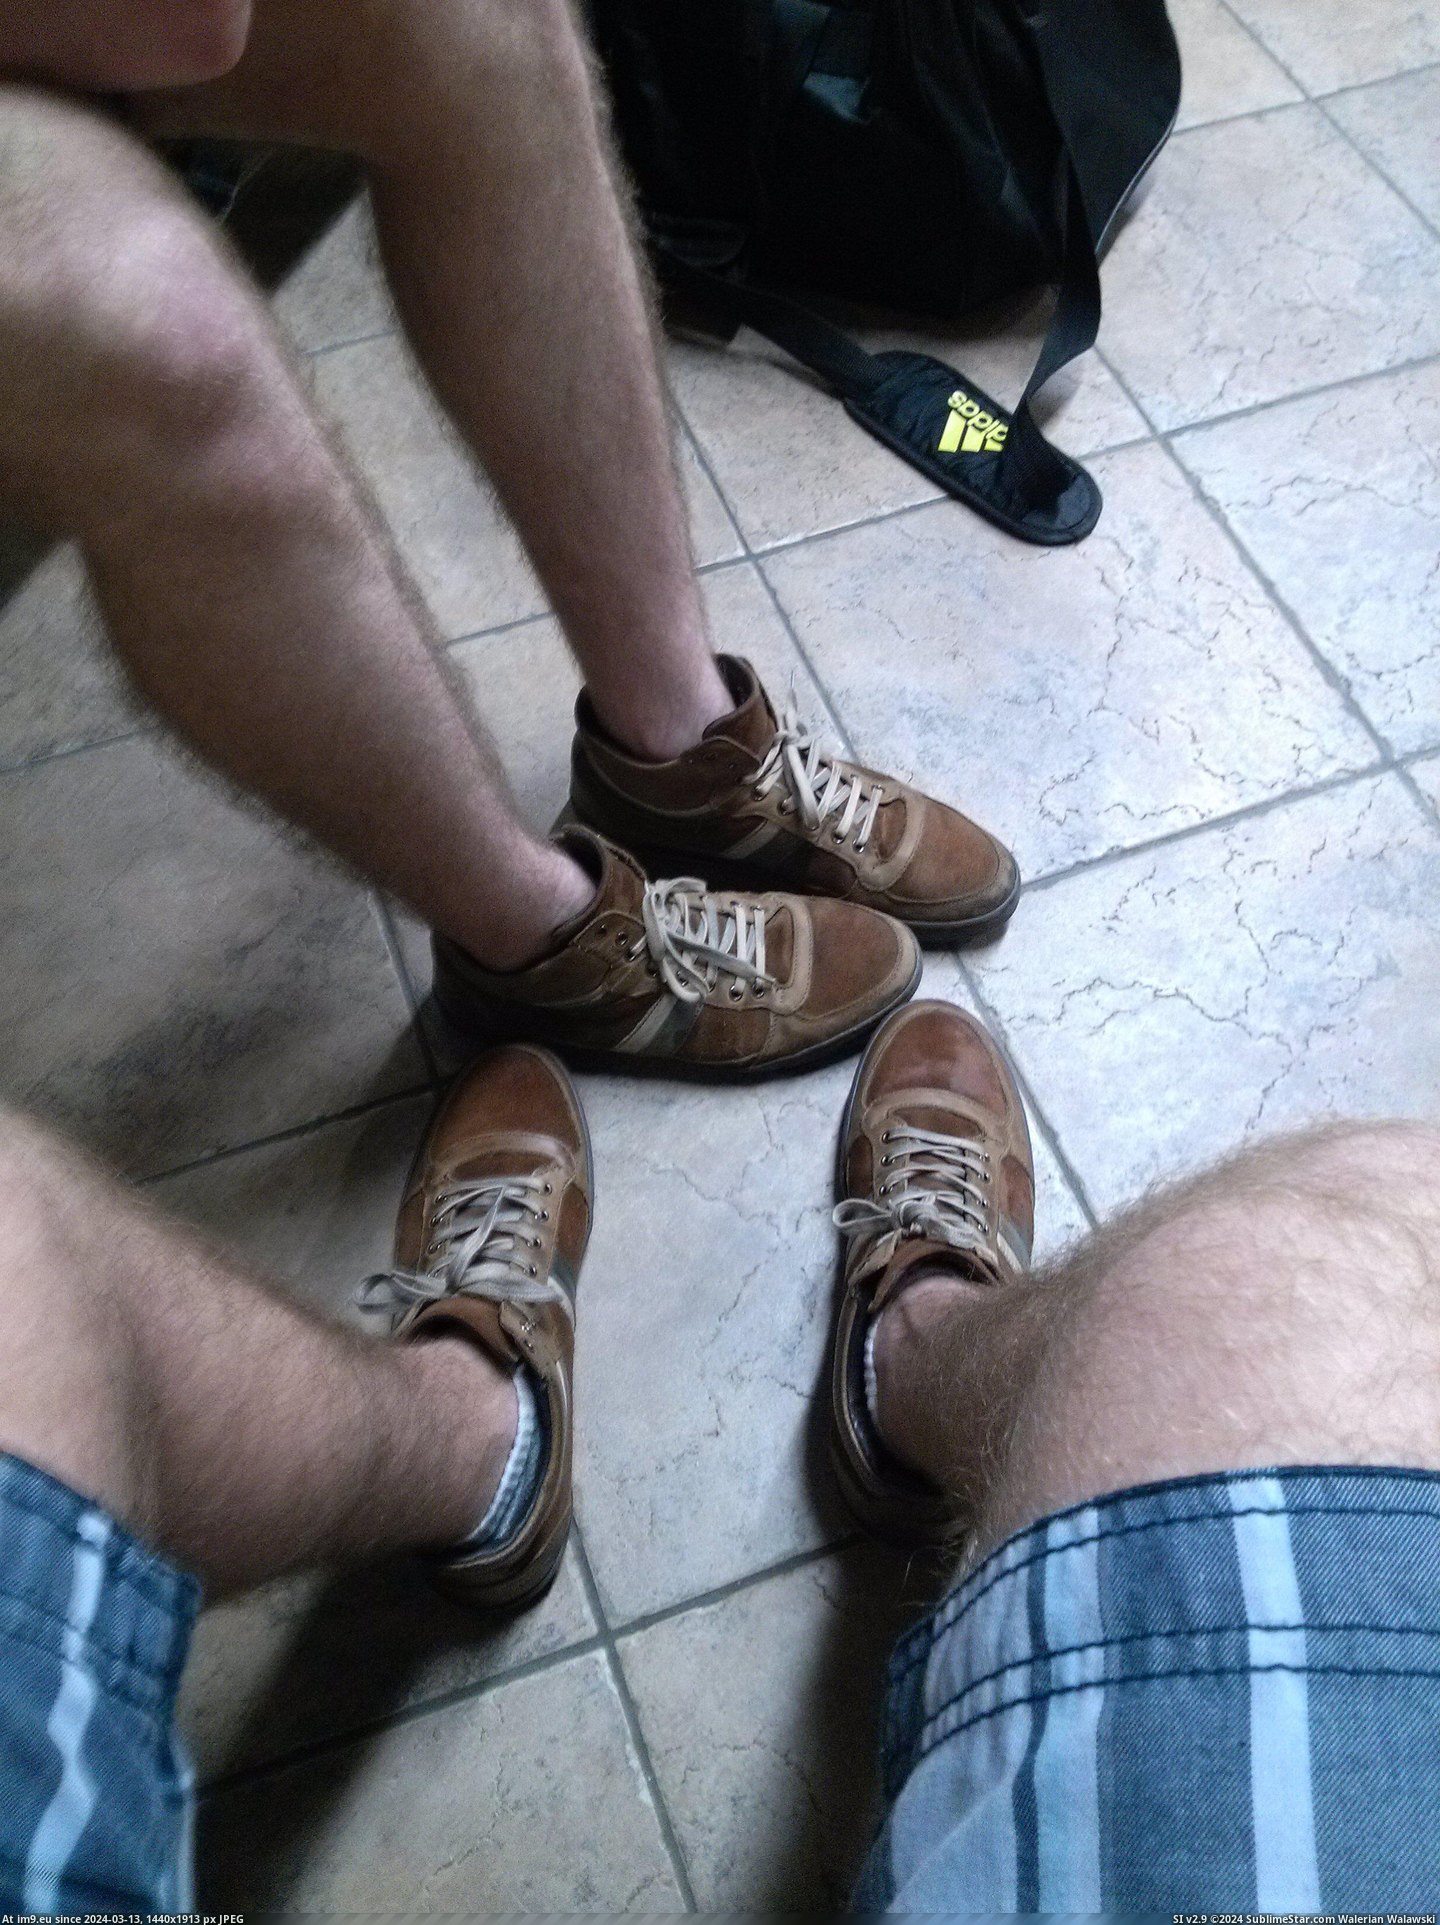 #Did #Bought #Country #Identical #Kno #Twin #Lives #Shoes [Mildlyinteresting] My identical twin who lives in a different country, bought the same shoes as I did. Without either of us kno Pic. (Bild von album My r/MILDLYINTERESTING favs))